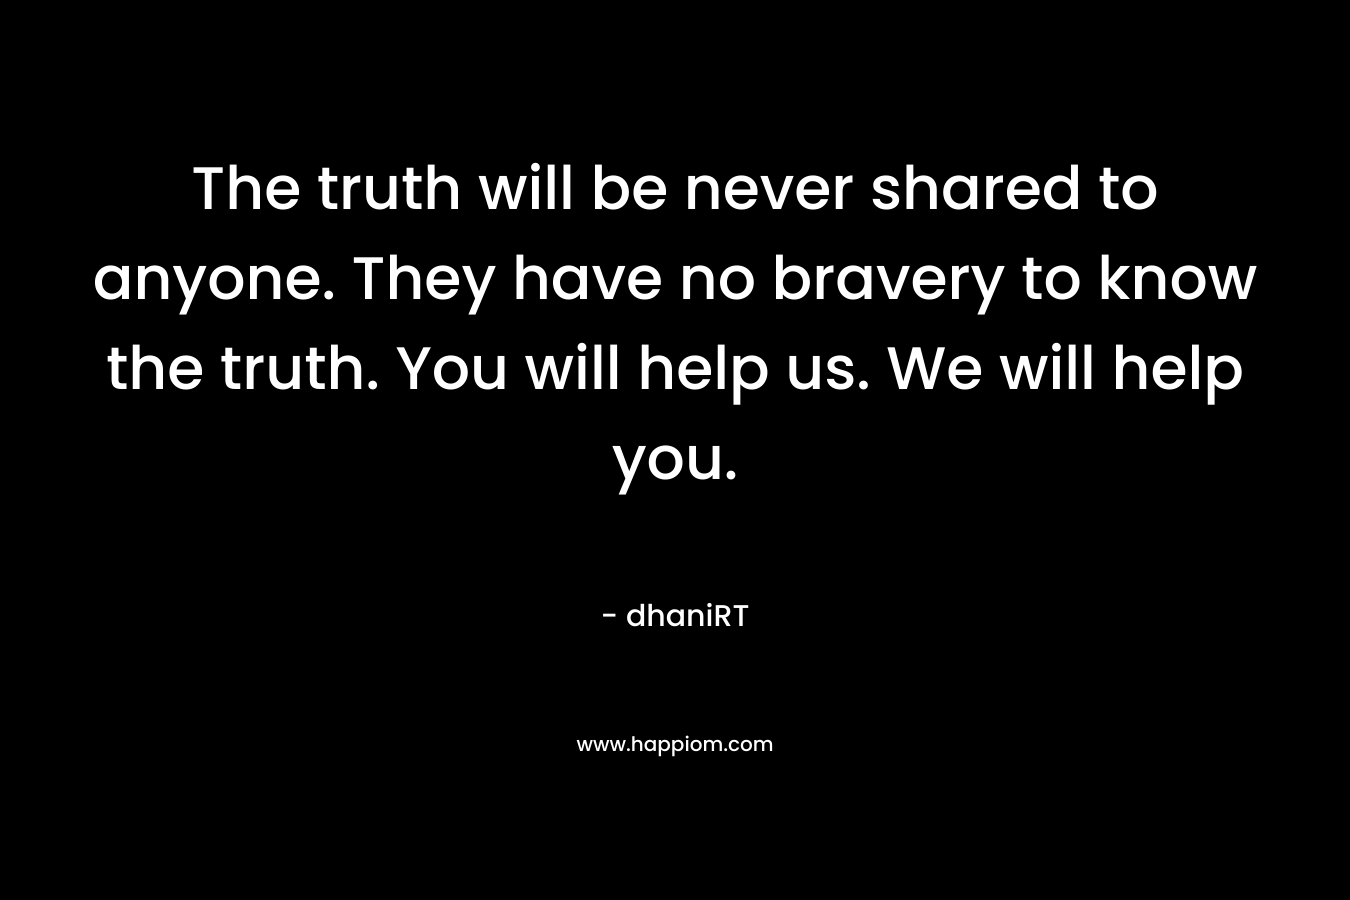 The truth will be never shared to anyone. They have no bravery to know the truth. You will help us. We will help you. – dhaniRT